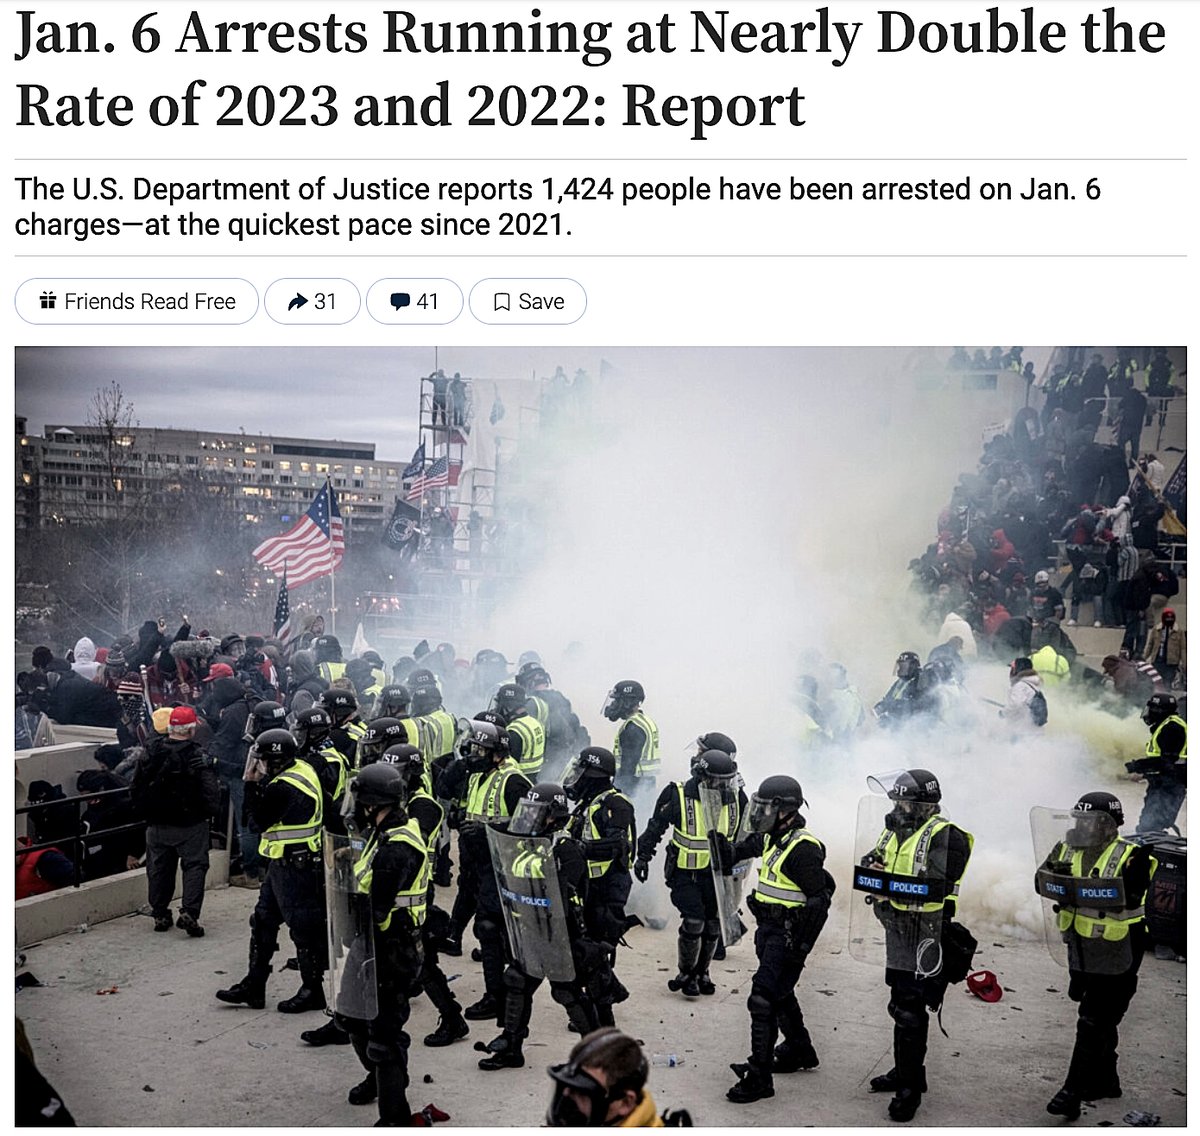 The rate of #Jan6 arrests running well ahead of past two years. theepochtimes.com/us/jan-6-arres…